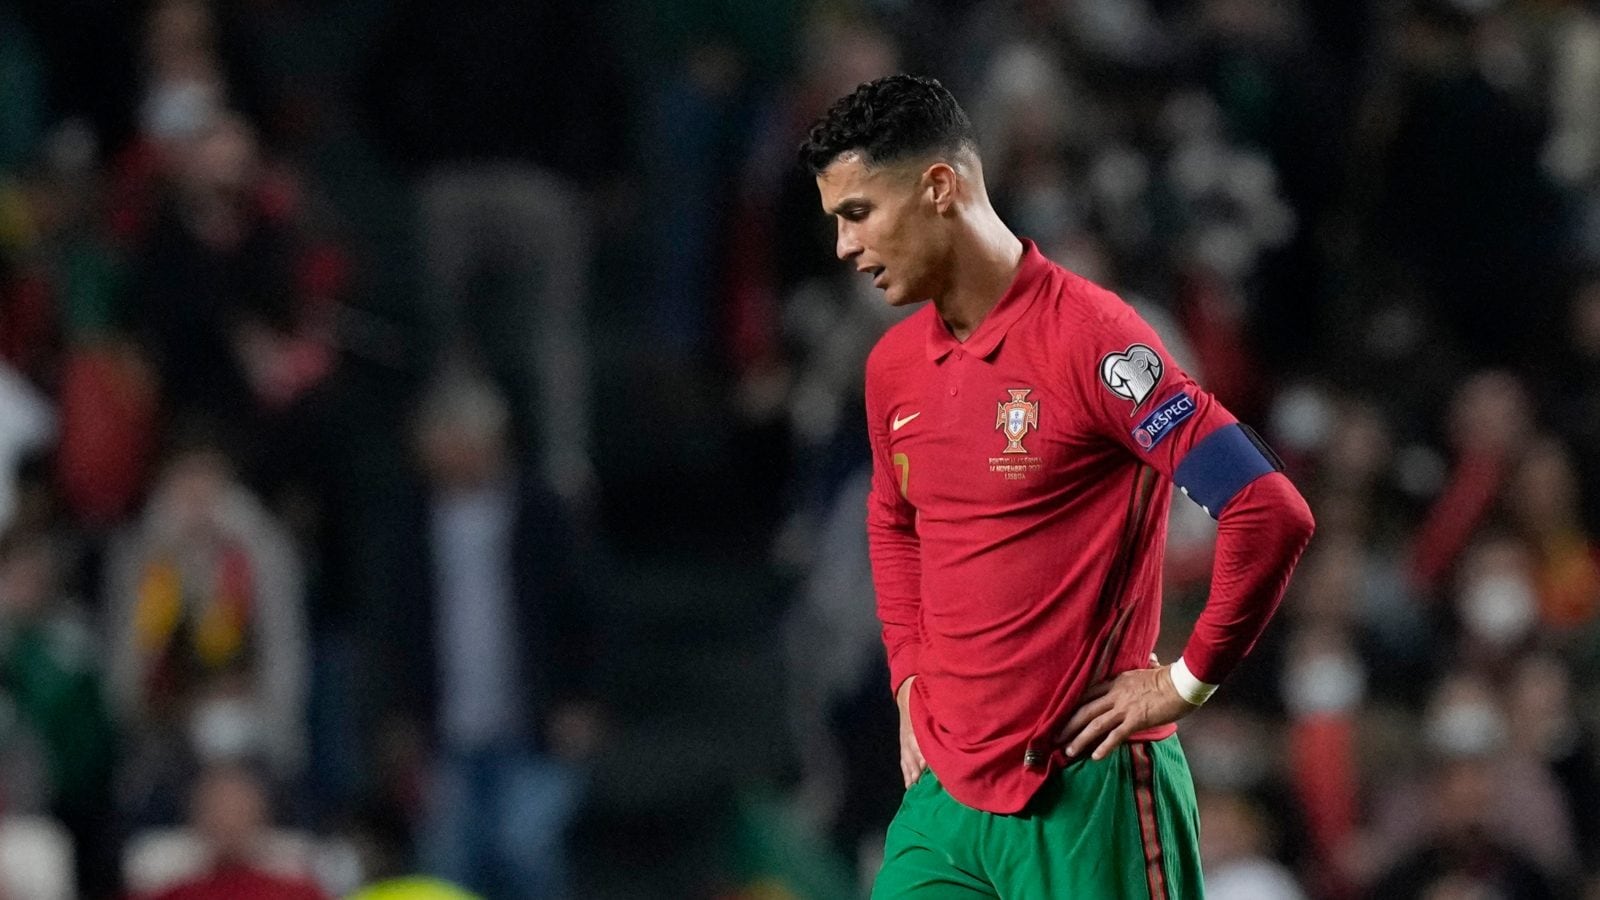 Cristiano Ronaldo and Portugal Shocked, Serbia and Spain Qualify for 2022 World Cup